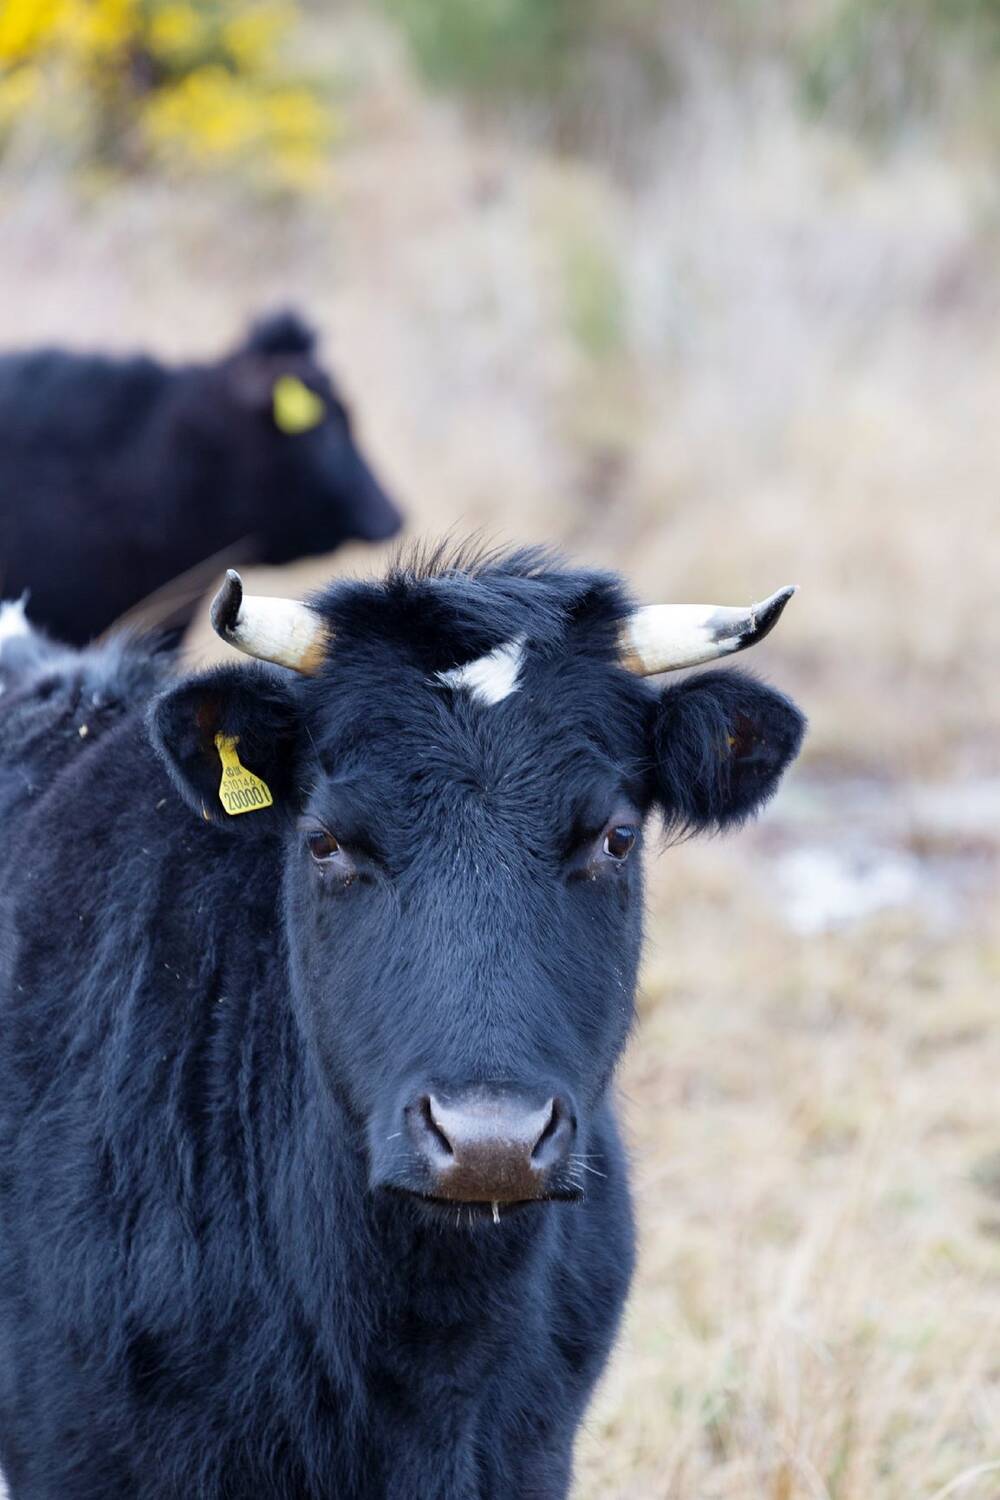 A close-up of a black Shetland cow, with another seen in the background. It has a yellow tag in one ear, and short sharp horns. It looks directly at the camera.